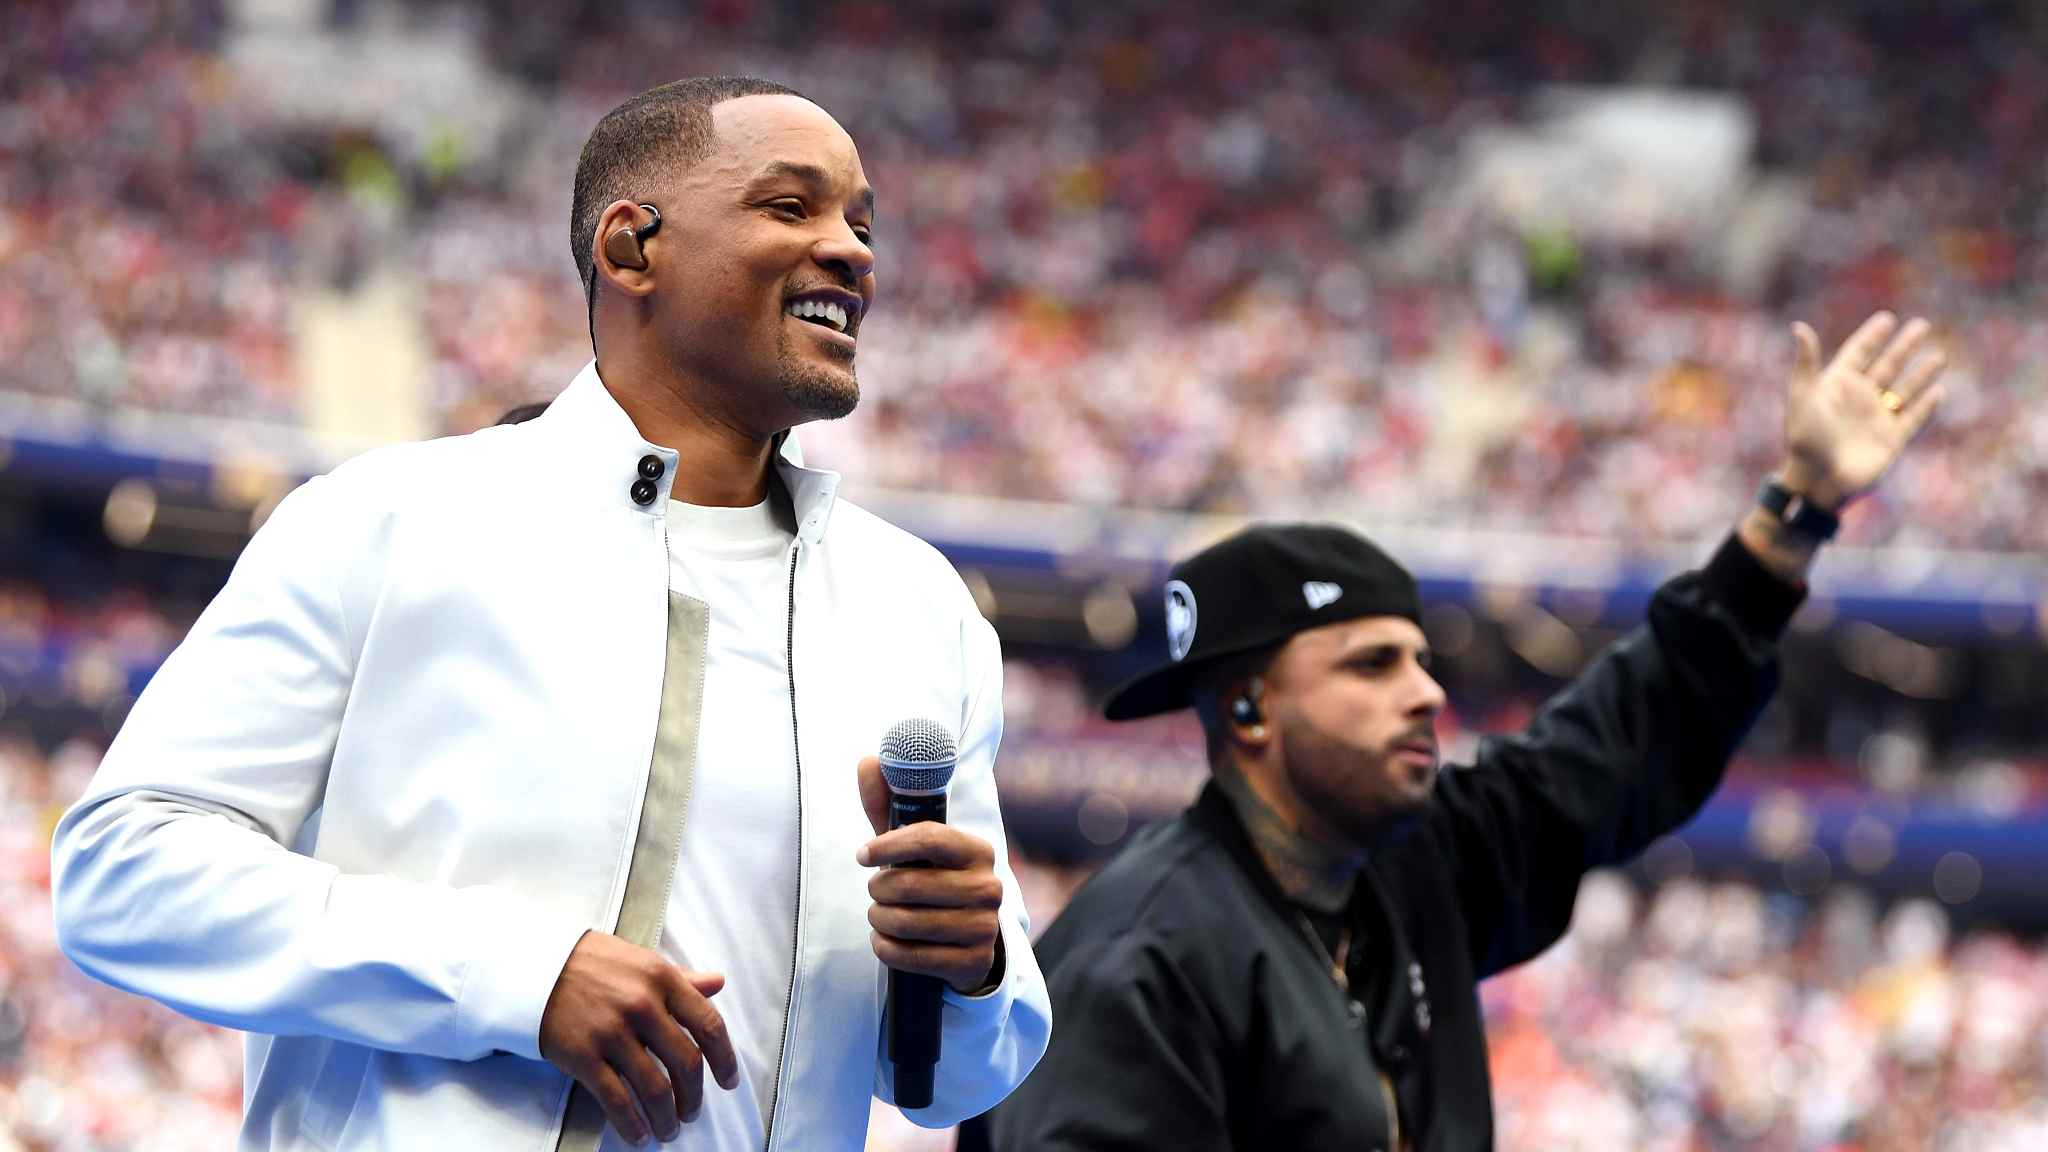 FIFA World Cup 2018: Nicky Jam, Will Smith light up closing ceremony